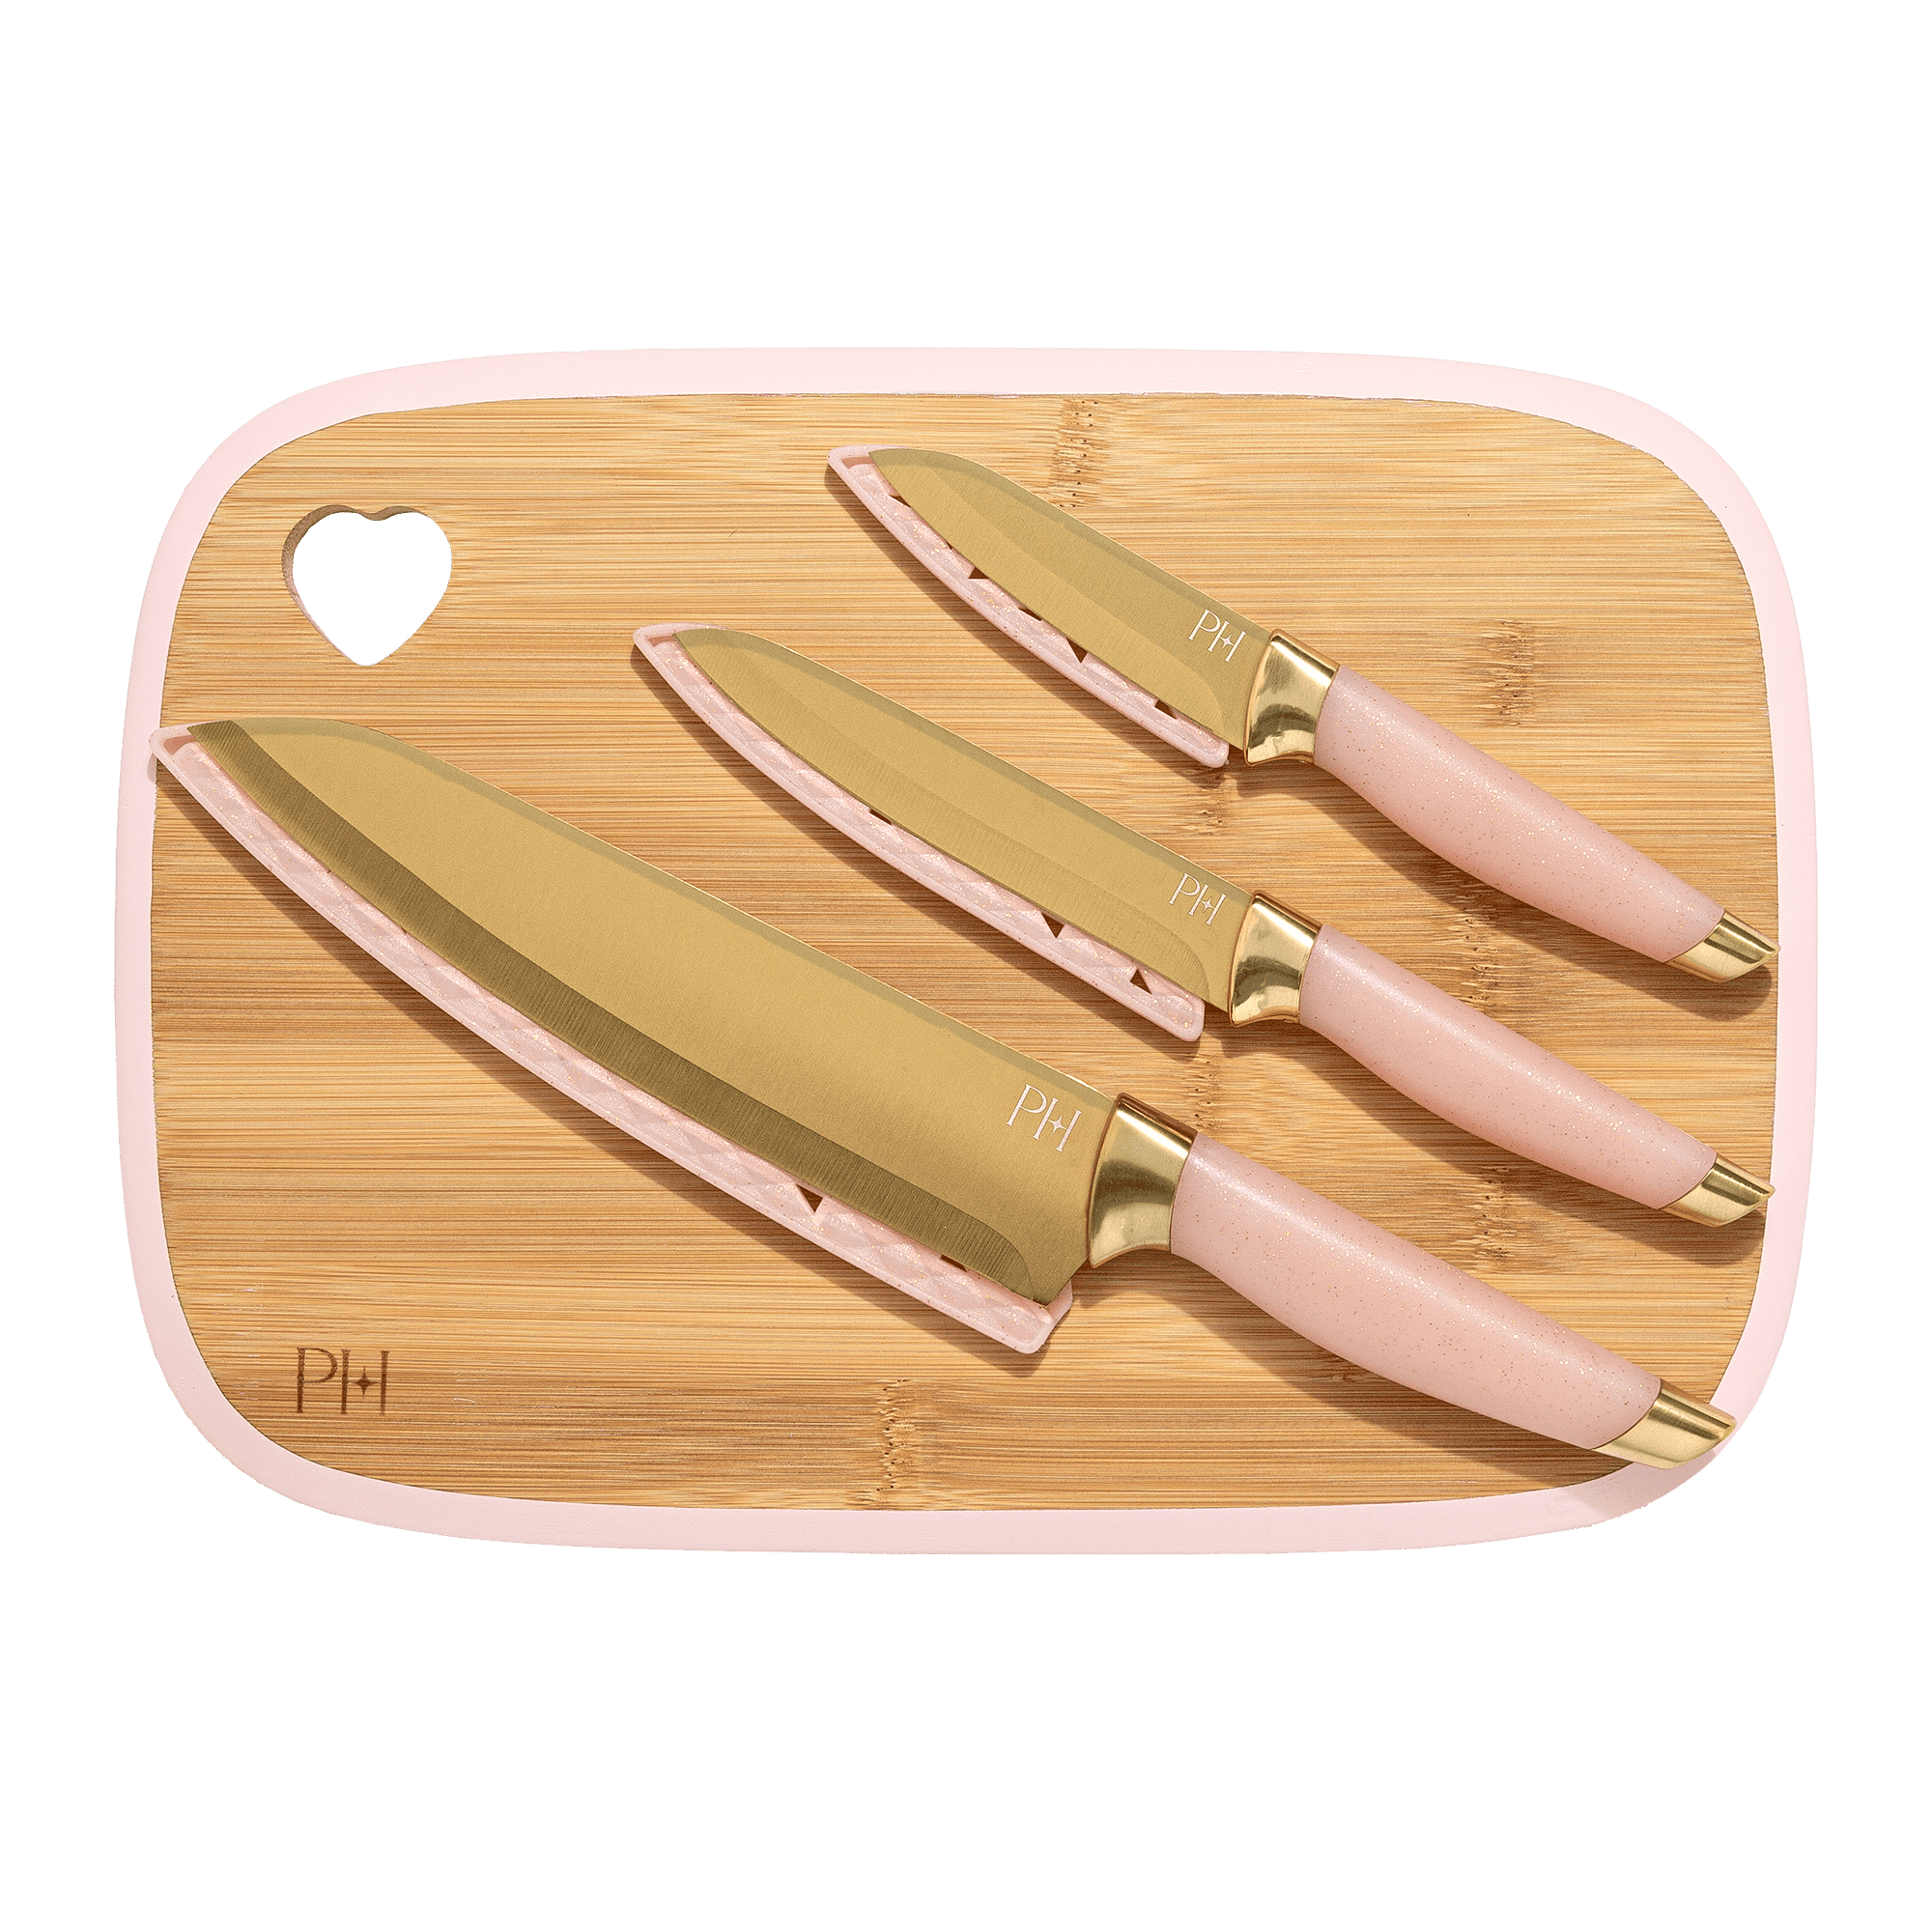 Paris Hilton 6-Piece Bamboo Heart Charcuterie Board and Serving Set, Pink